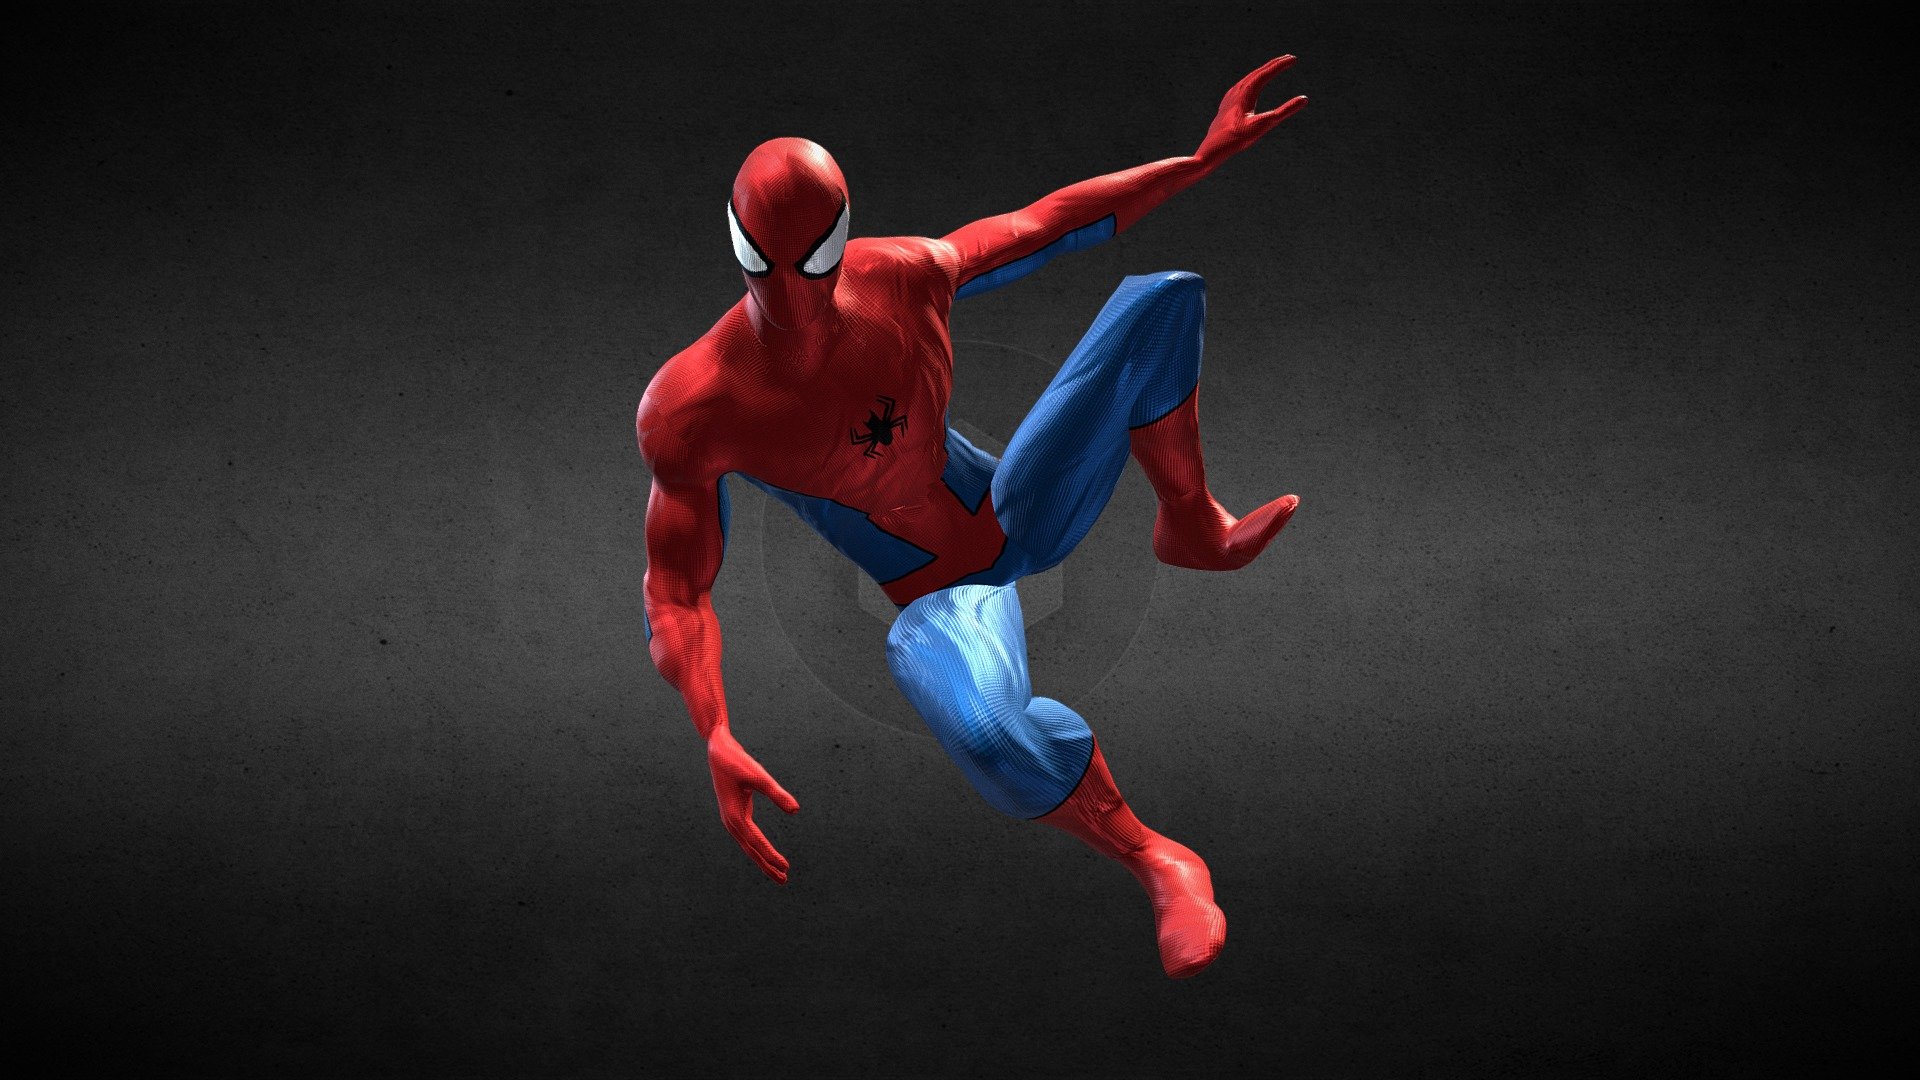 Hello everyone!

Here is a old Spider-Man I decided to improve, all the work was done using blender and substance painter.

Animation ready rig with FK and IK
2K Textures
Faces 16,620
Blender version 2.81
www.artstation.com/carlosguimaraes - Spider-Man - Buy Royalty Free 3D model by 3DGuimaraes 3d model